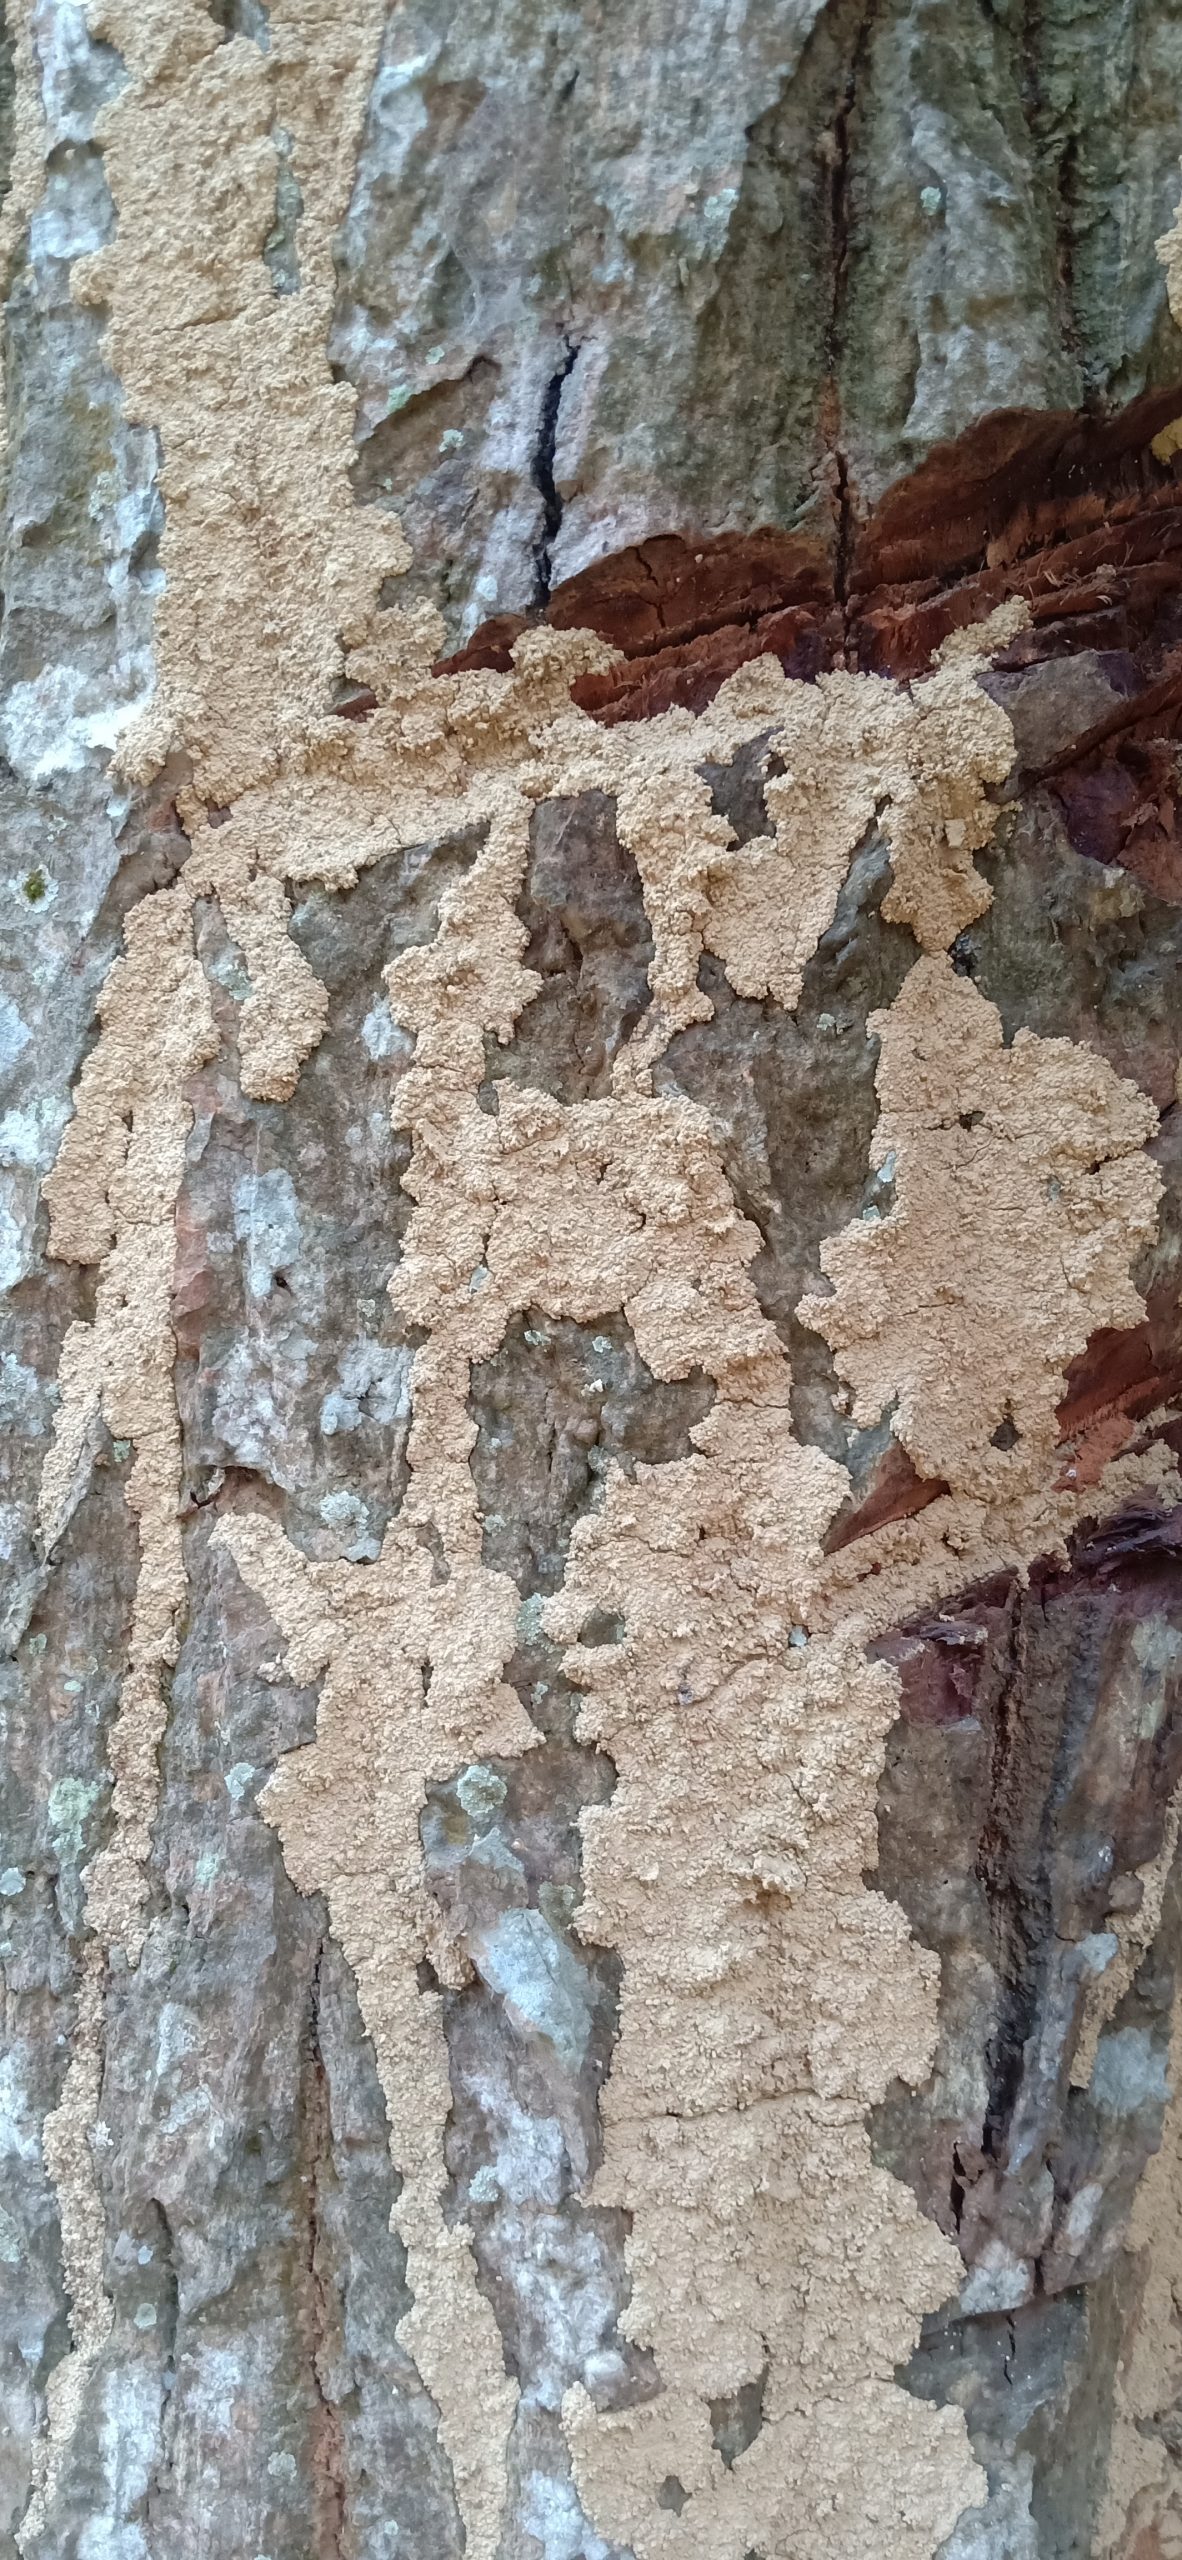 A tree damaged by termites